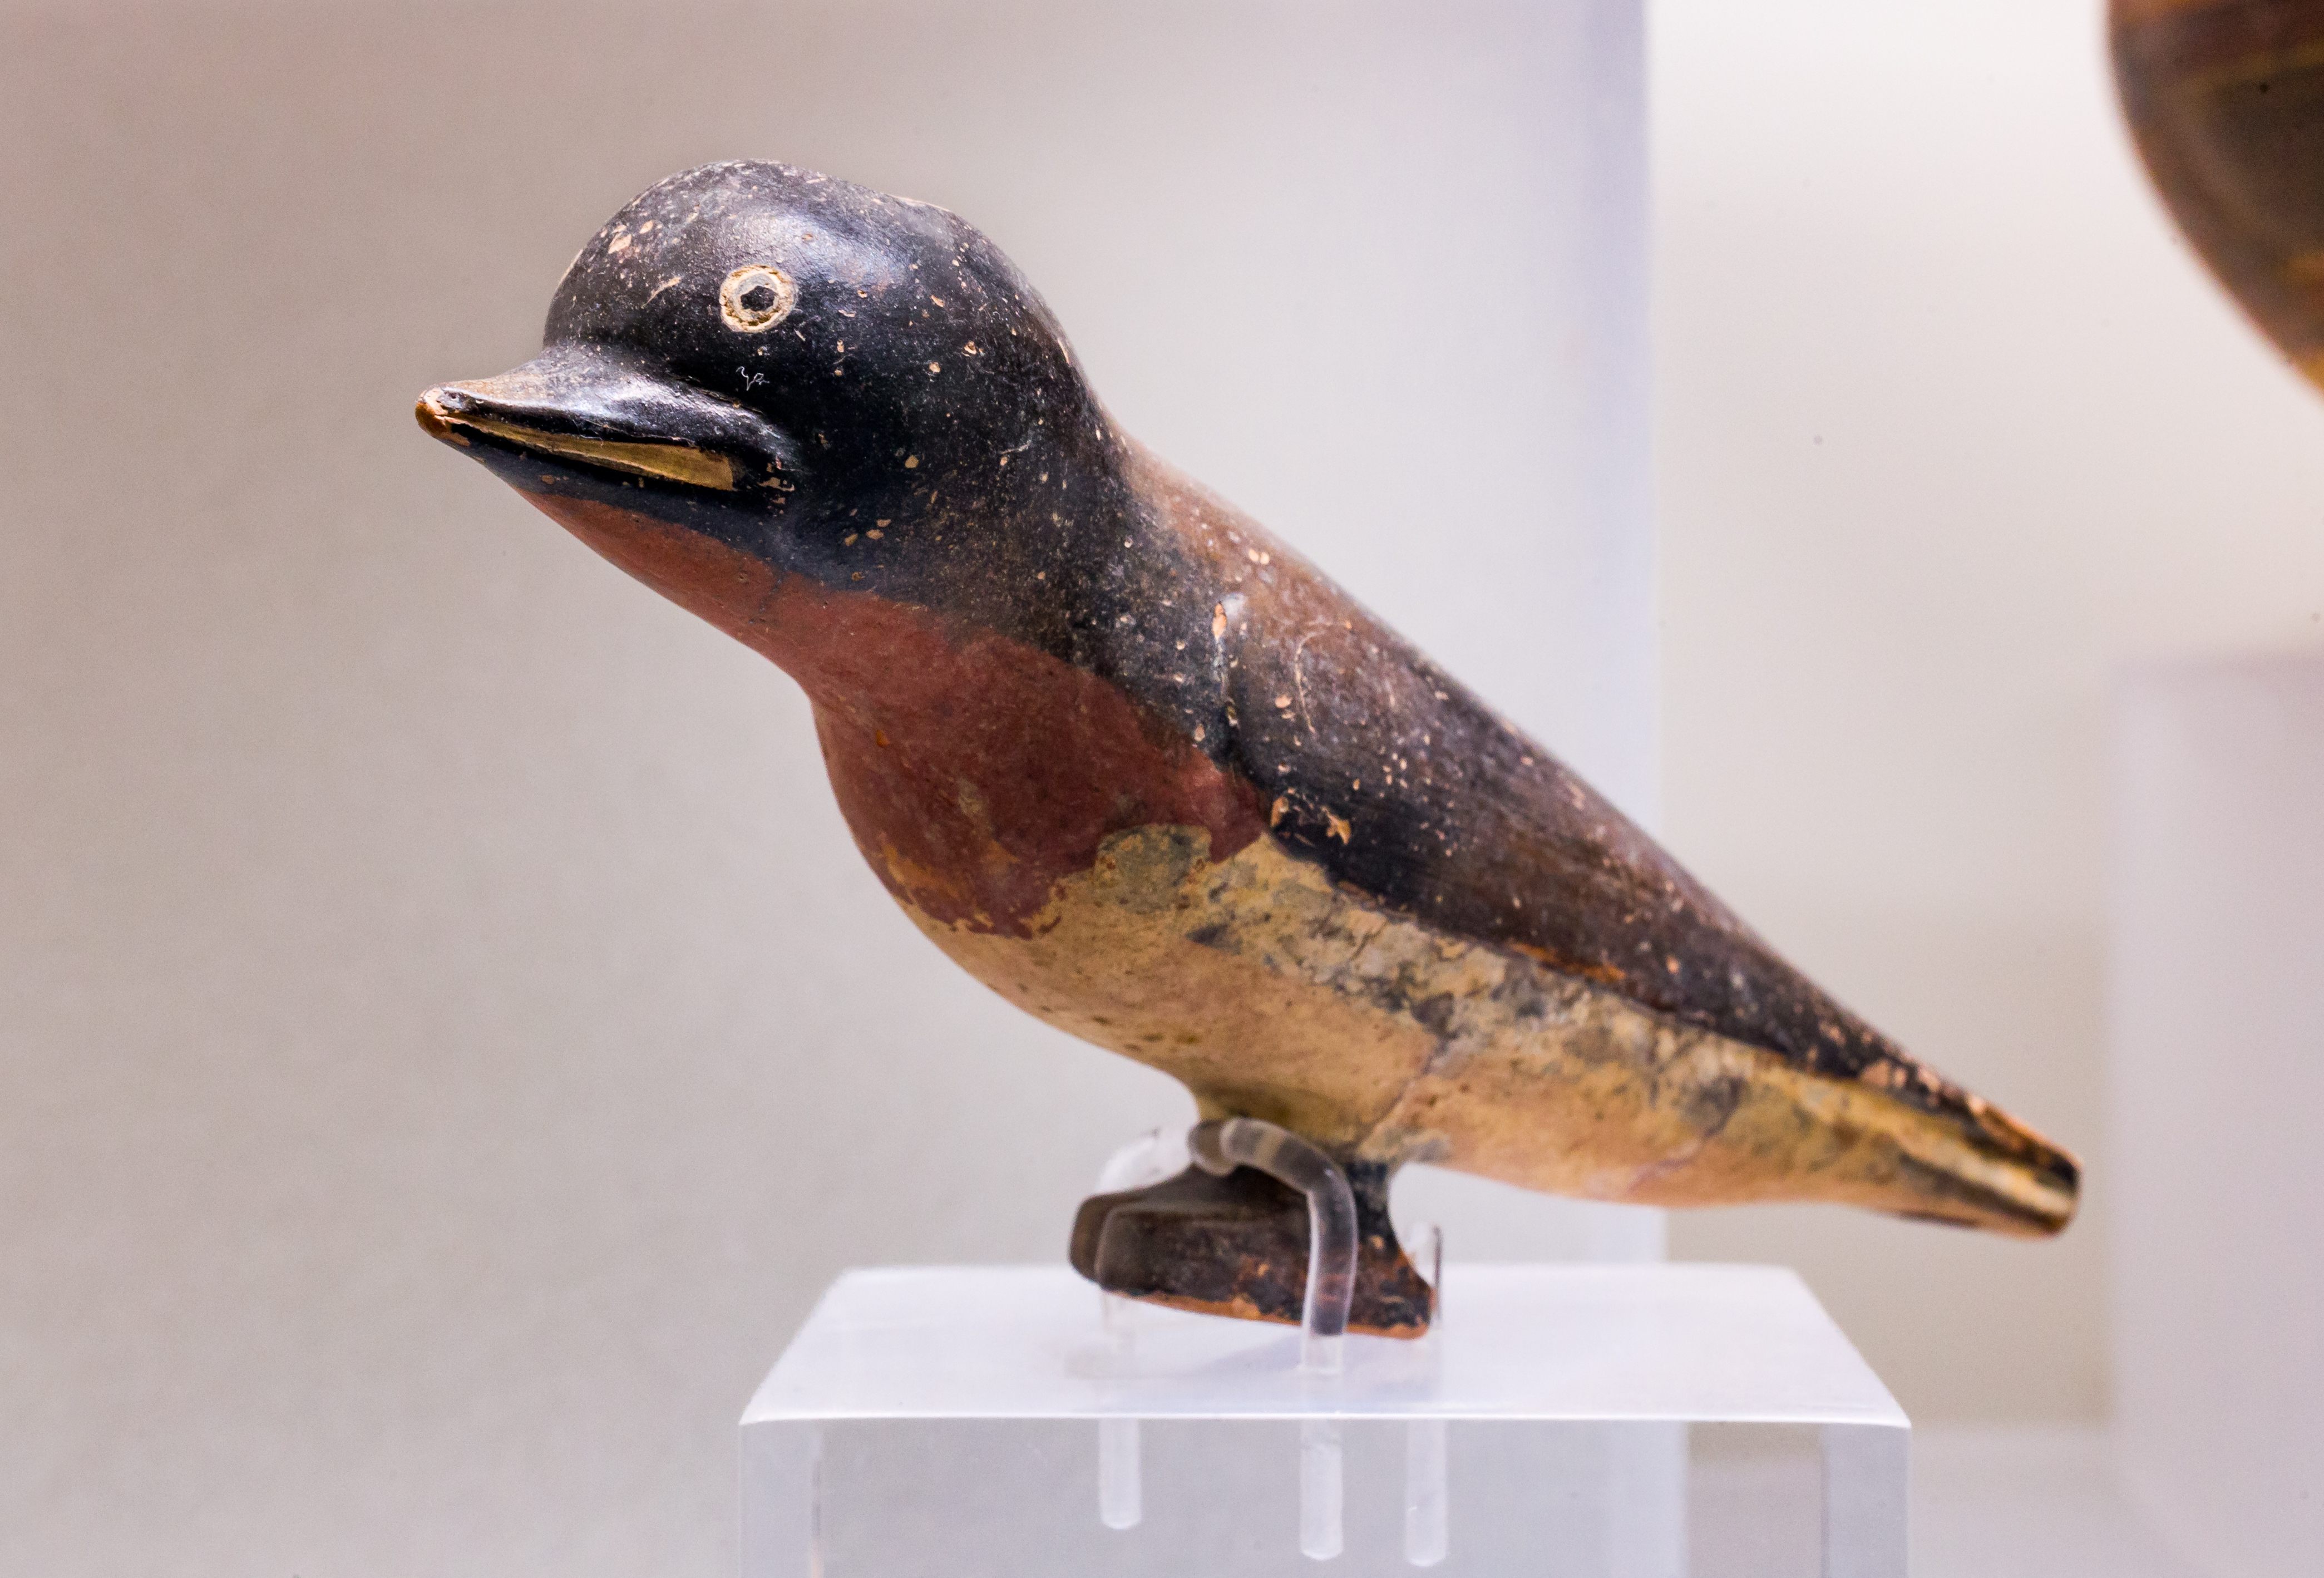 Swallows were a common motif in ancient Greek art, such as this sixth-century BC perfume bottle from Rhodes.